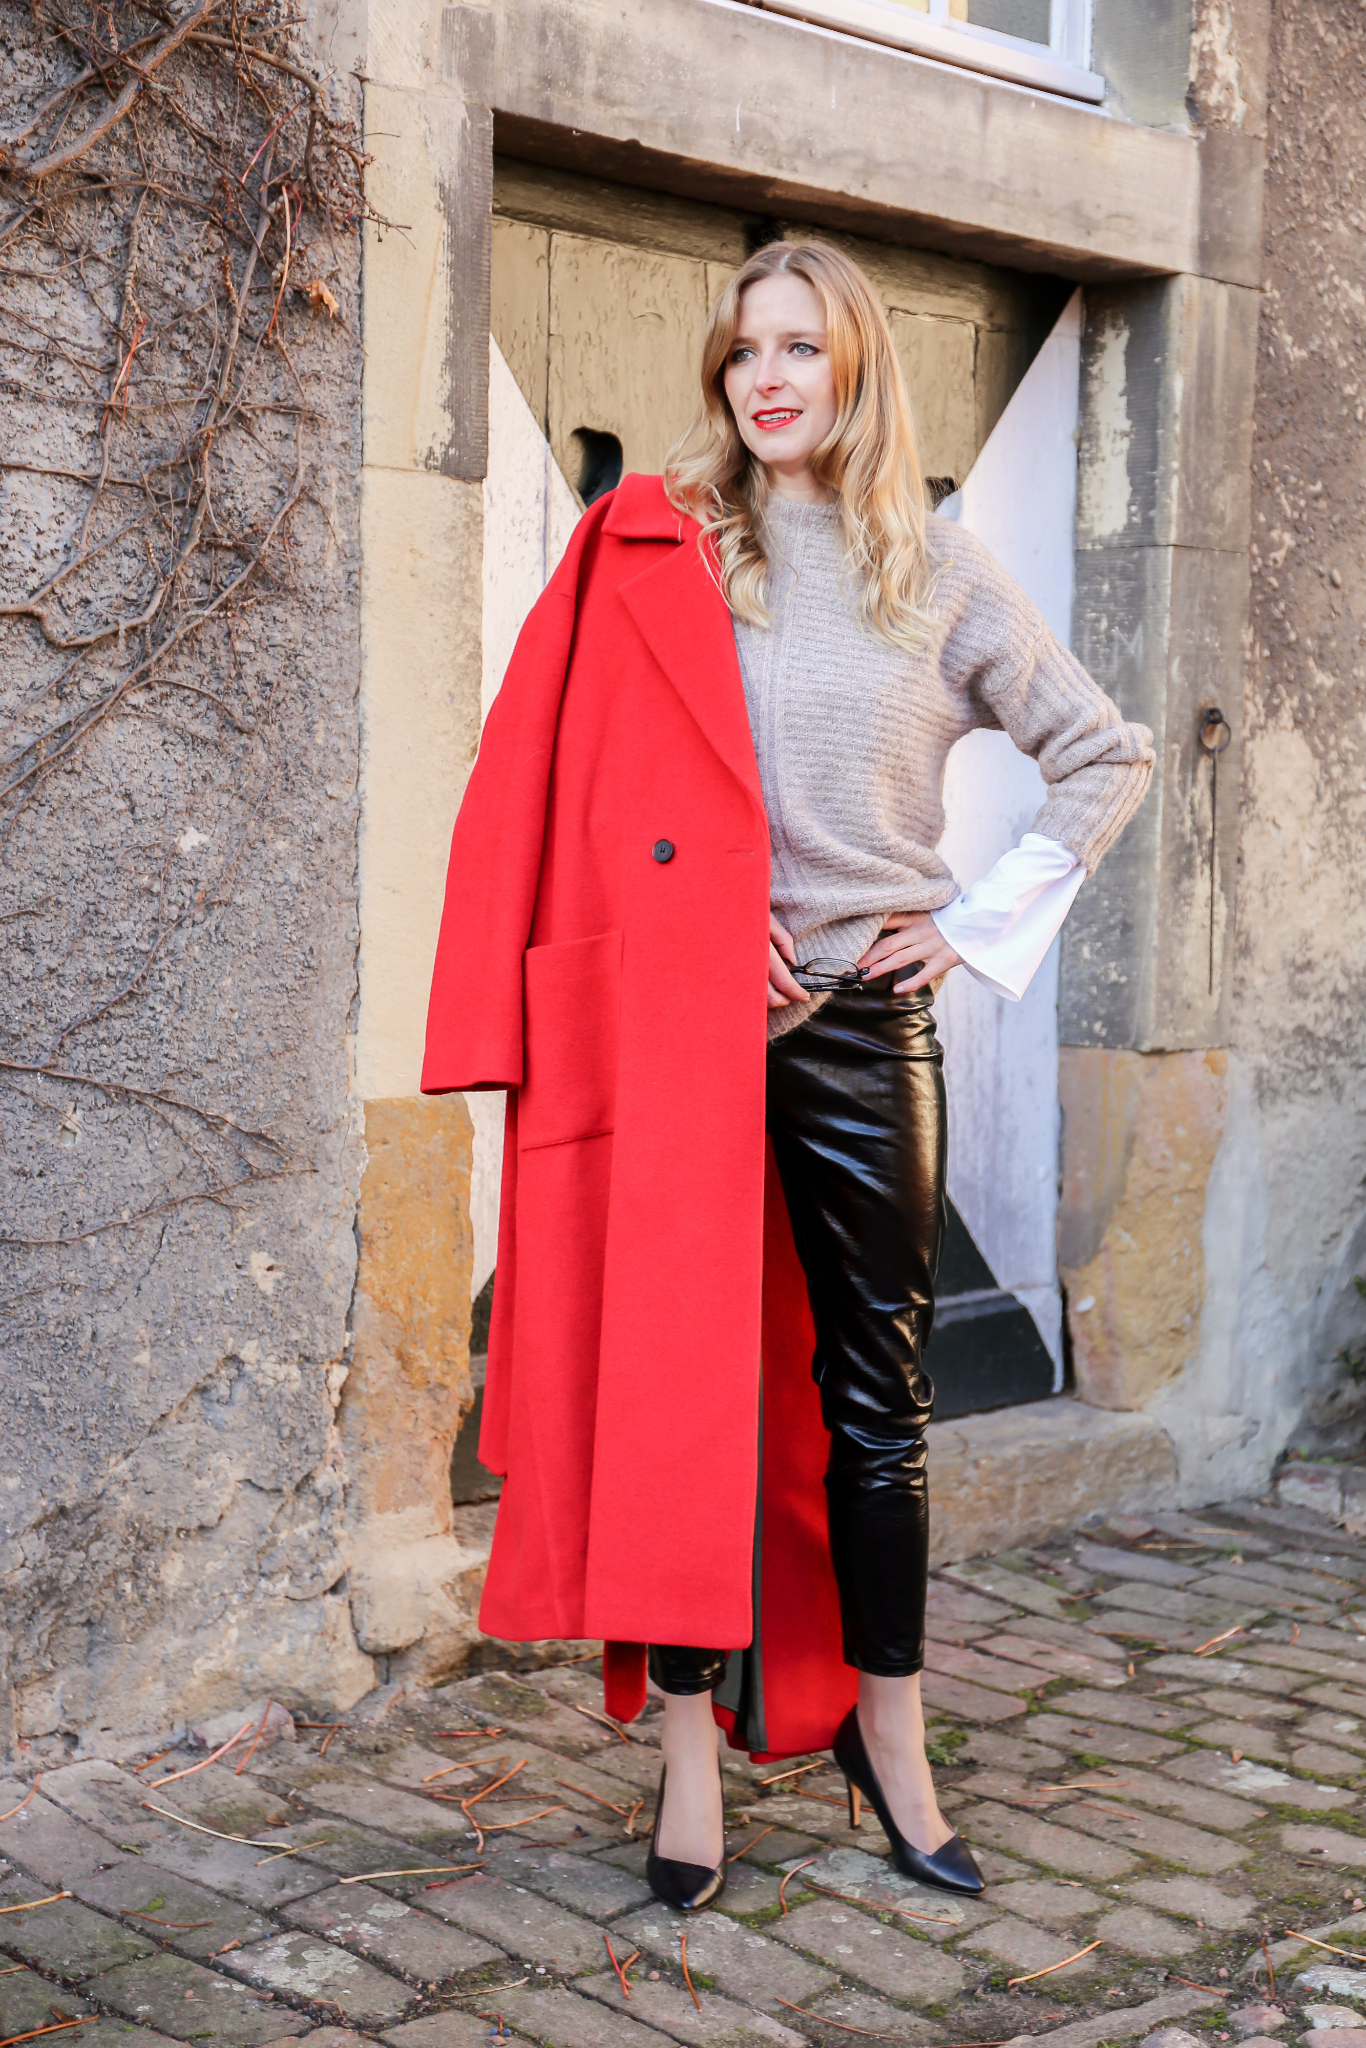 MOD-by-Monique-Fashion-Looks-Patent-Leather-Red-Coat-8